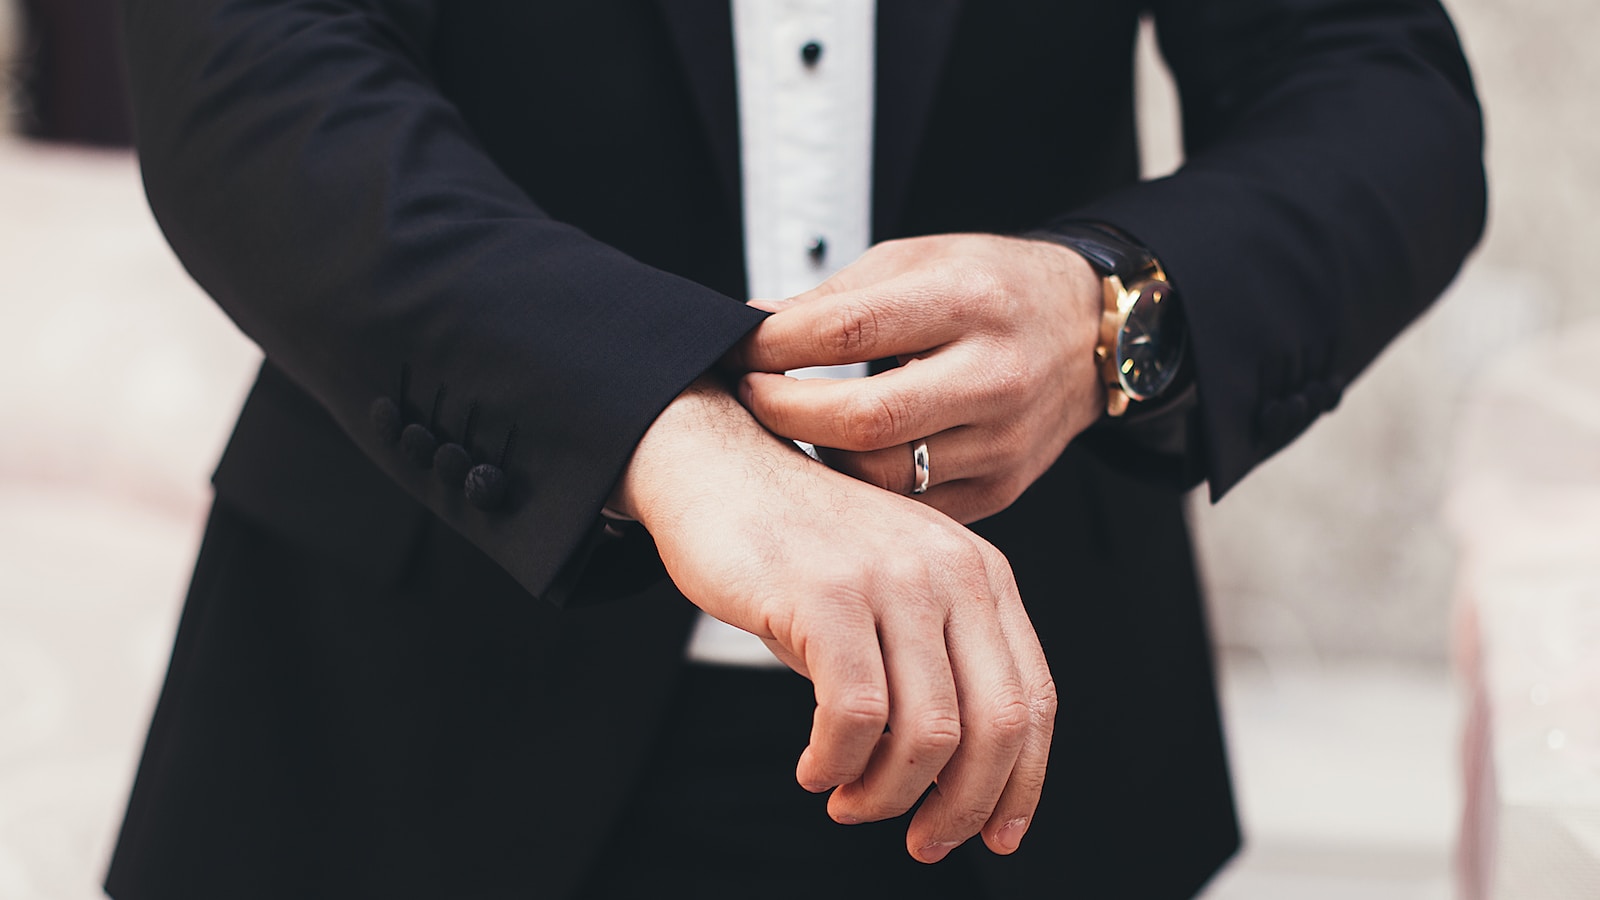 A man's hands adjusting the cuffs of his black suit